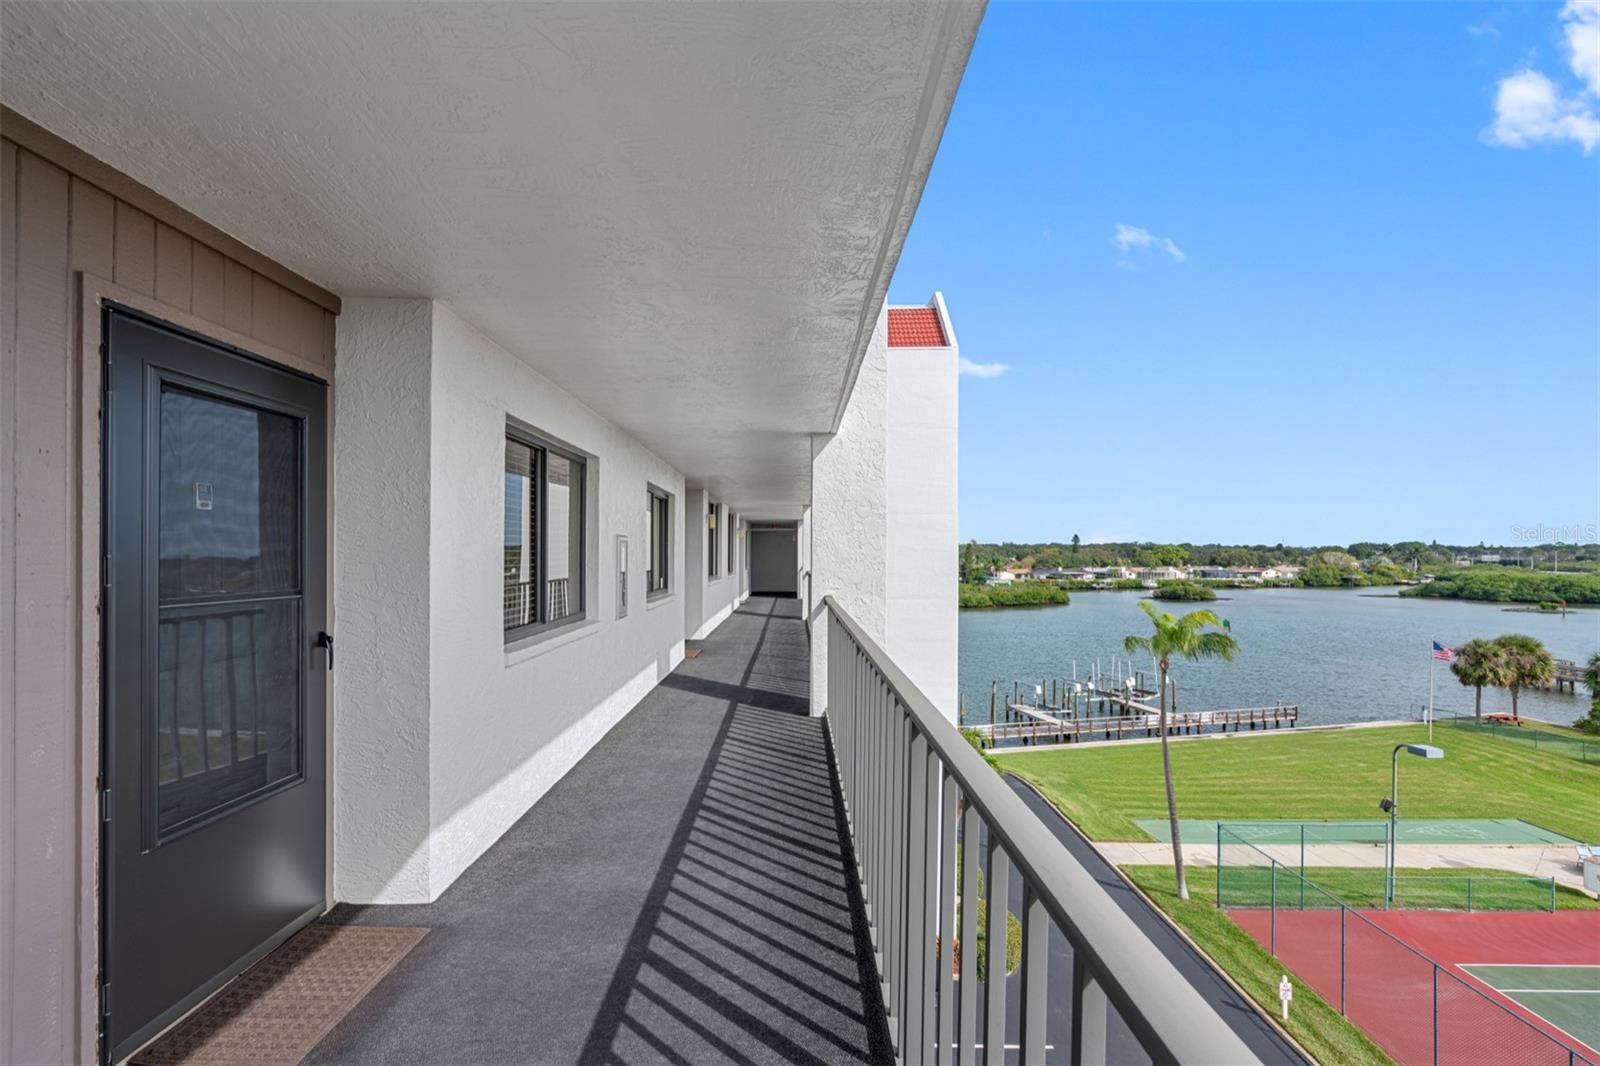 .. Residence # 512 Front Walkway has a Southern Exposure. Perfect for watching the Tennis Matches and Sunsets 6 months out of the year..